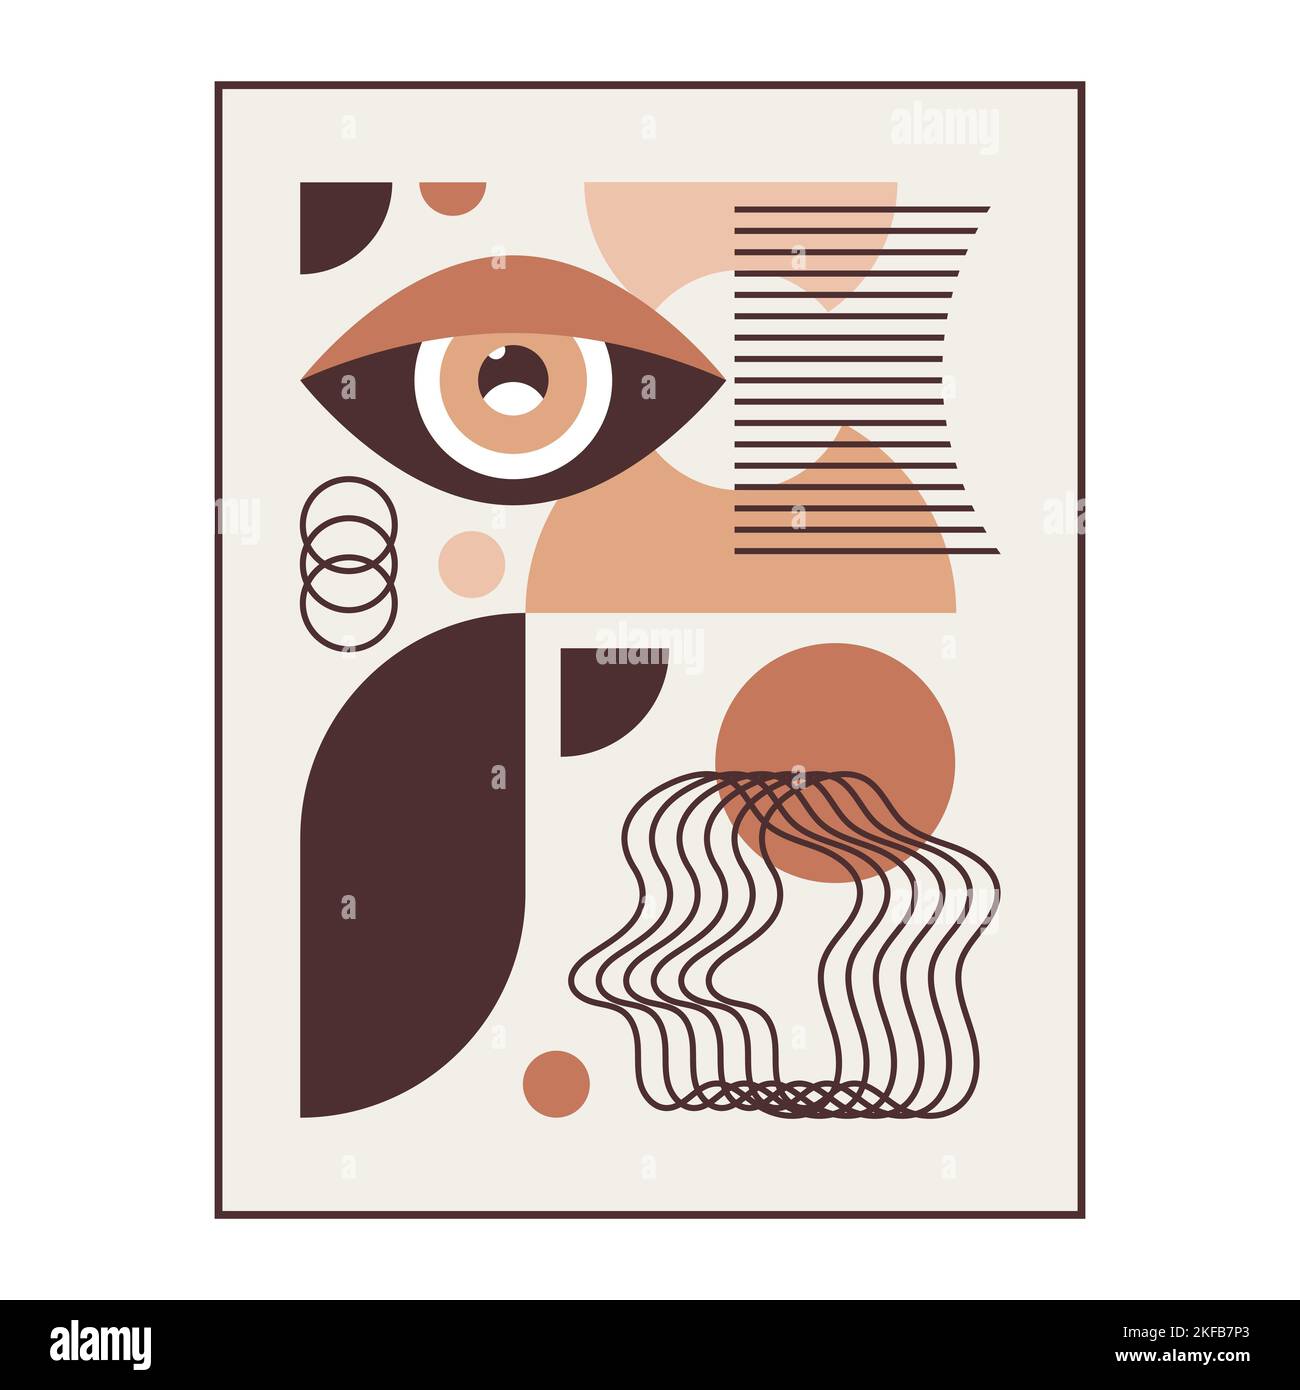 Bauhaus geometric poster. Abstract shapes and eye. Stock Vector